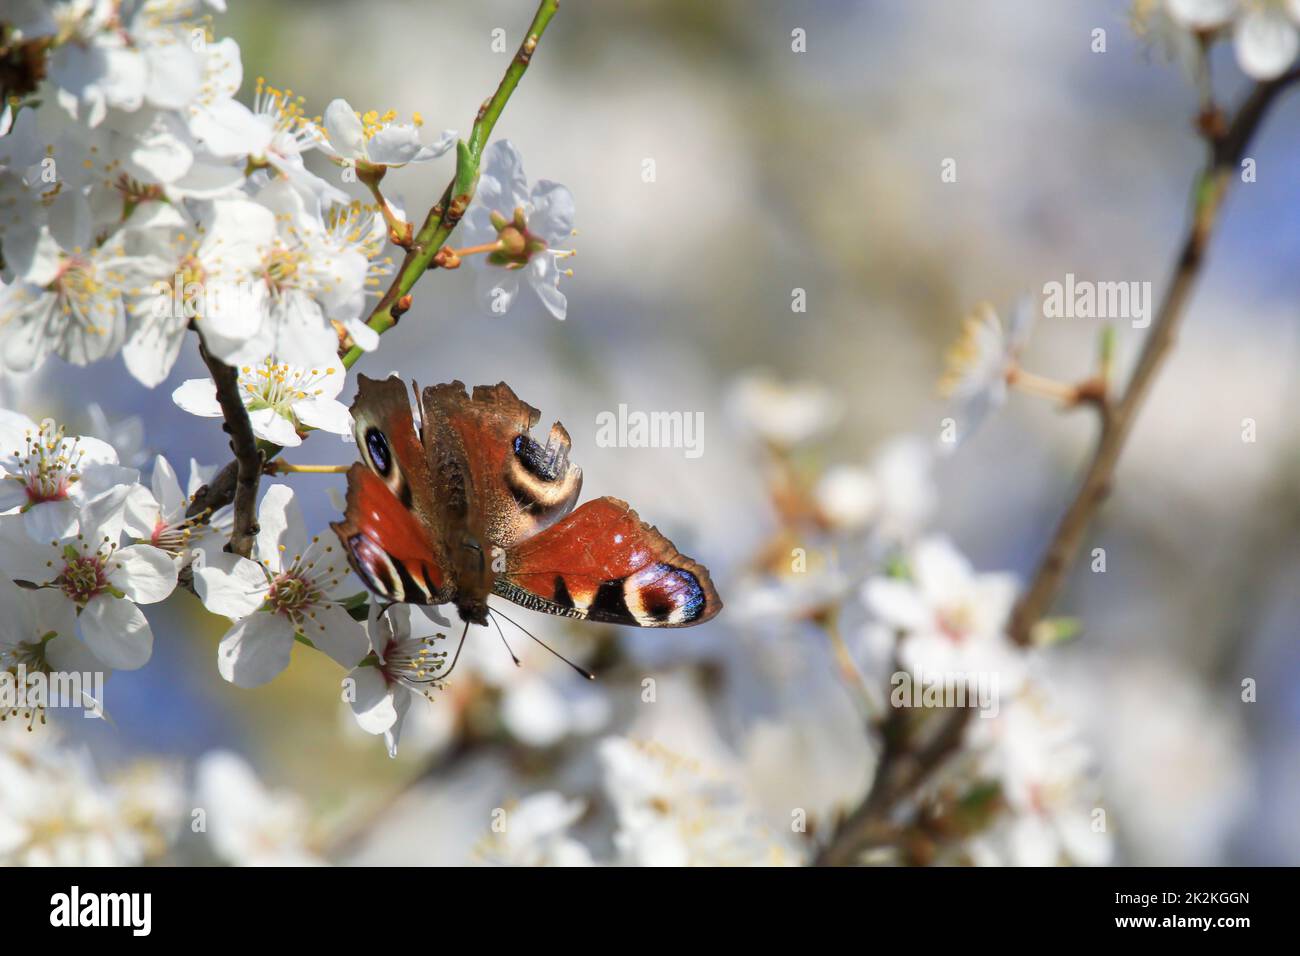 A peacock butterfly on the blossom of a fruit tree. Stock Photo